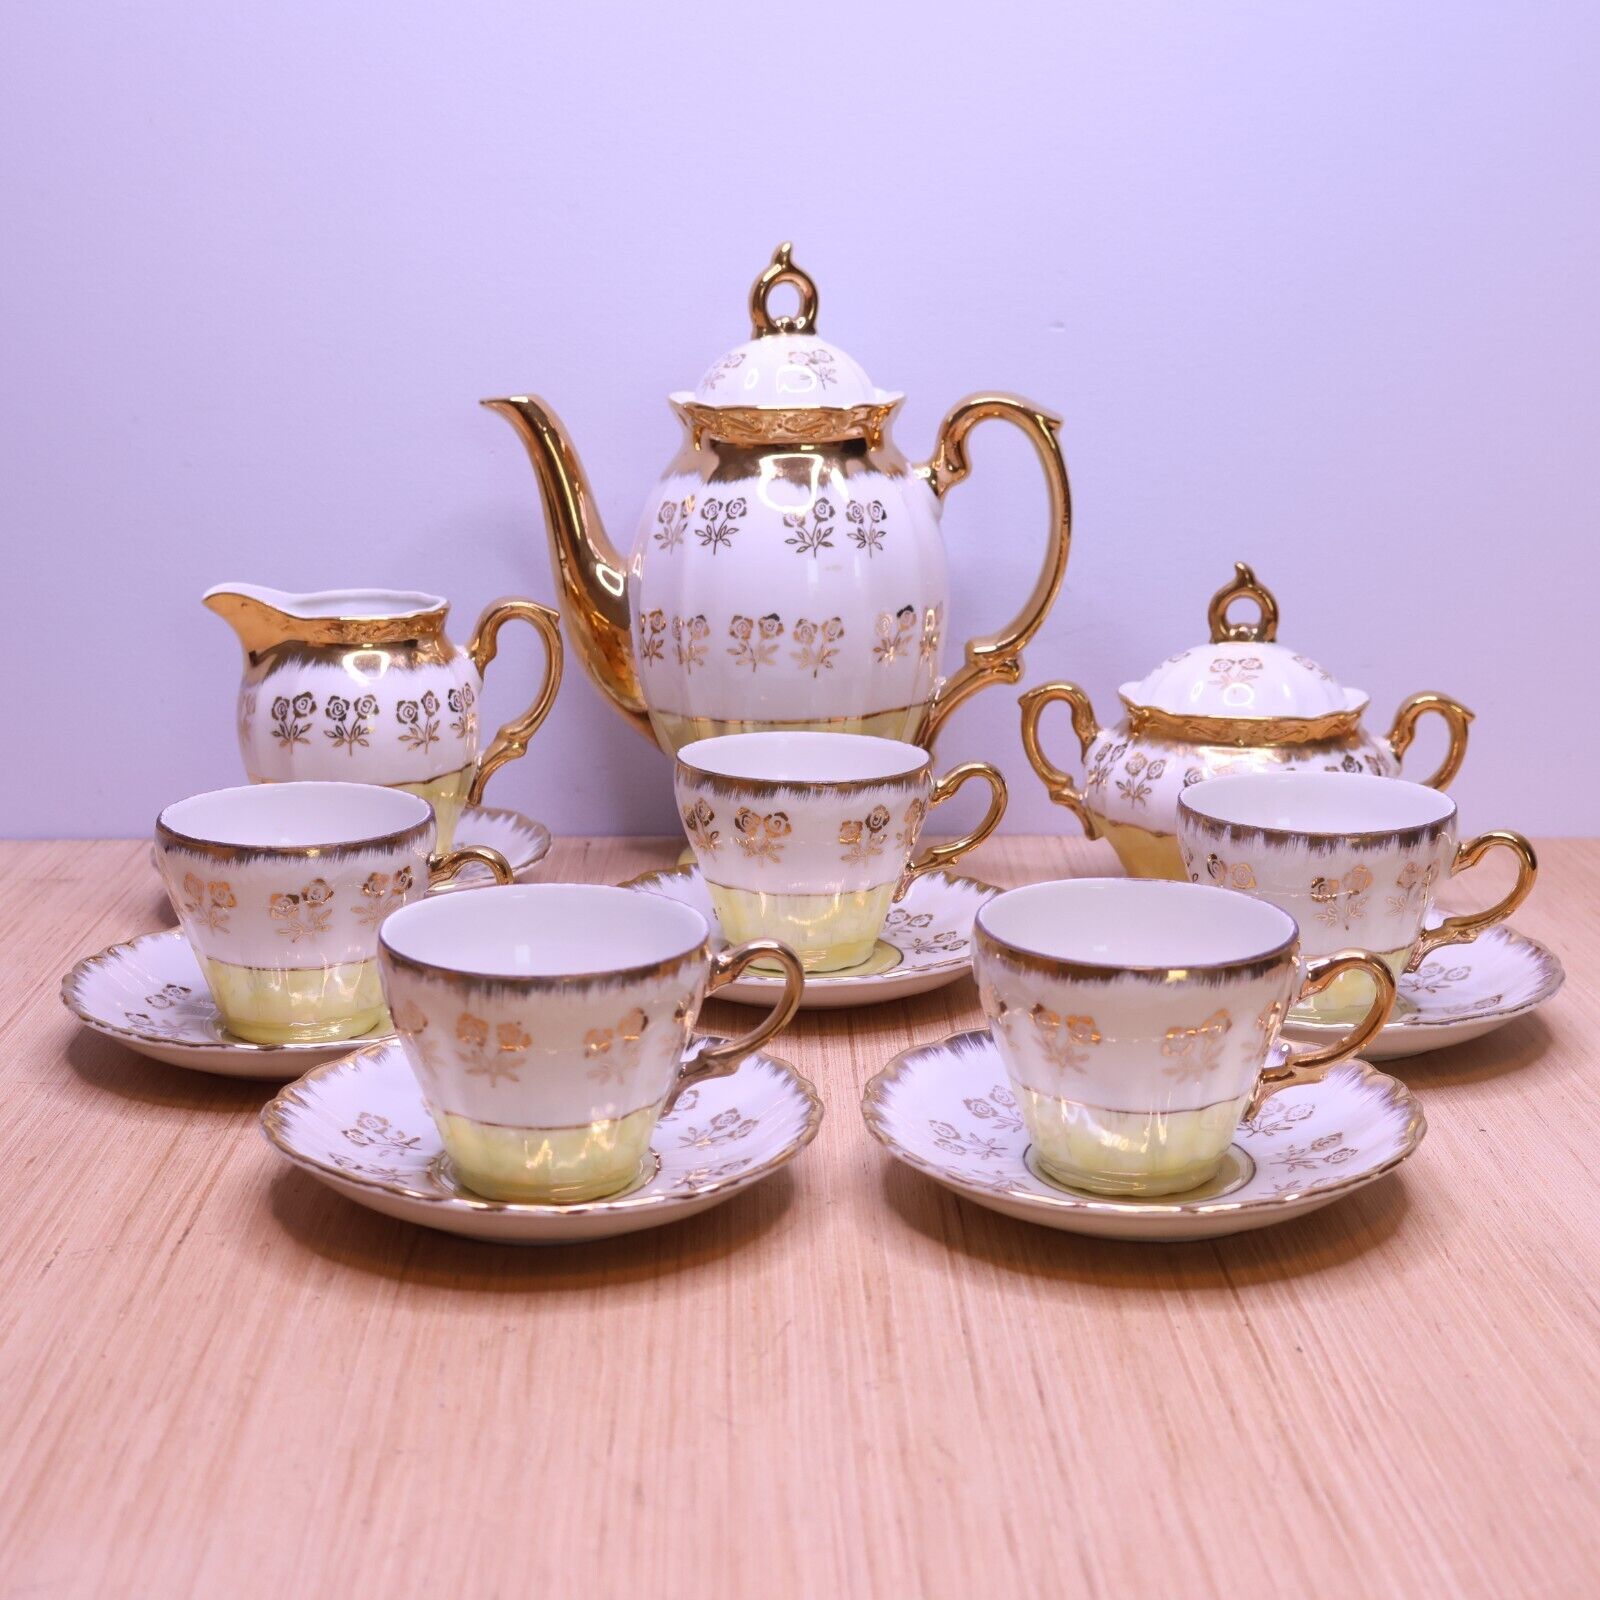 Fine China Vintage Tea Coffee Set Made in Japan 16 pieces White & Gold Flower